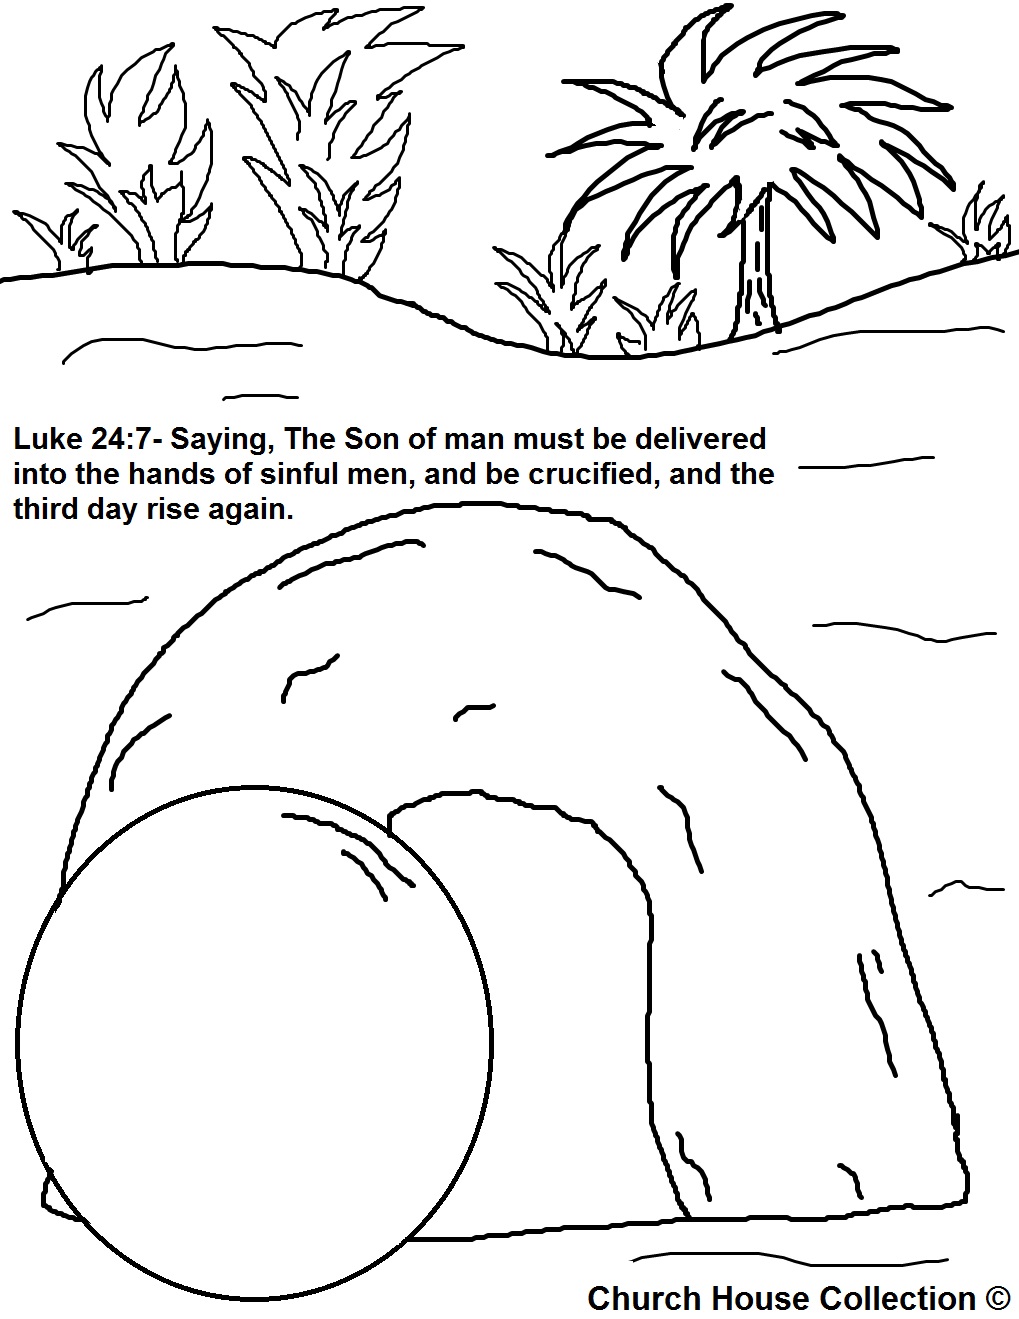 Church House Collection Blog: Christian Easter Coloring Pages